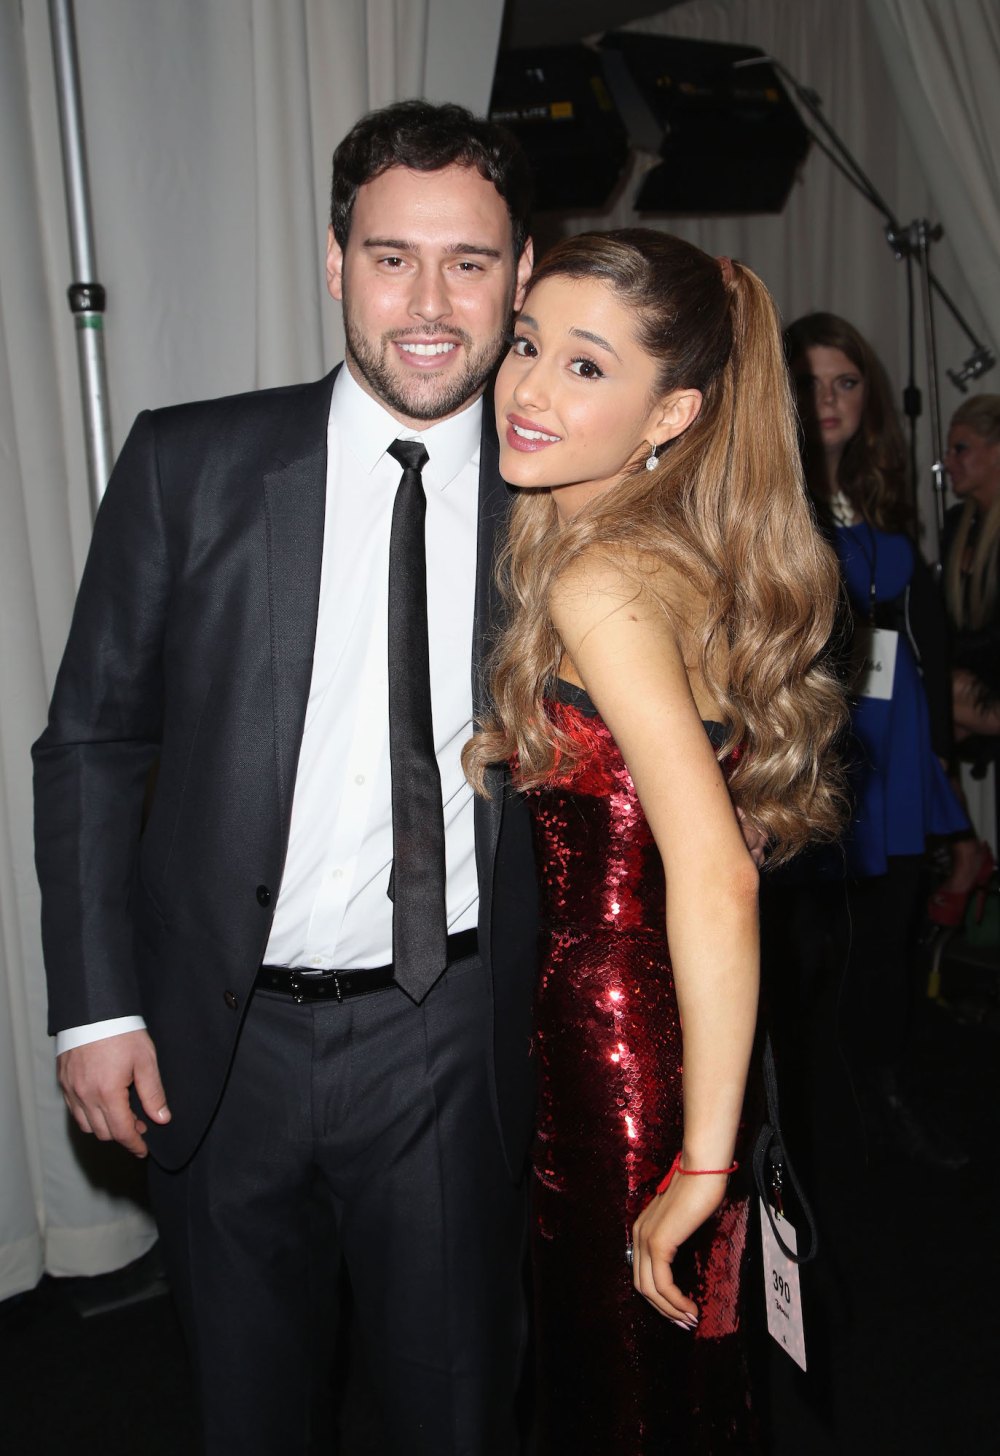 Ariana Grande Will Continue to Work With Scooter Braun at His Company Hybe